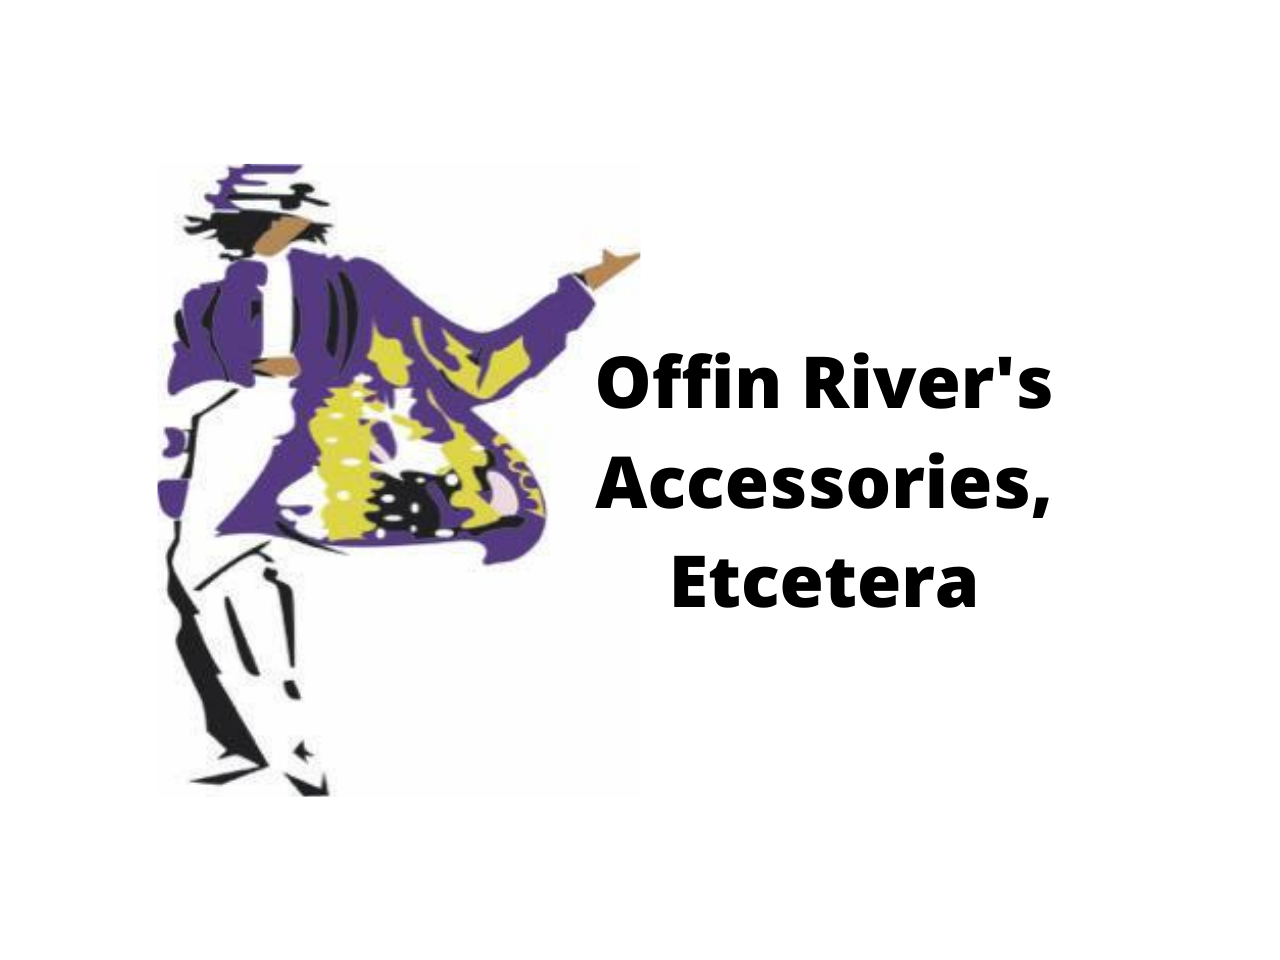 Offin River's Accessories, Etcetera